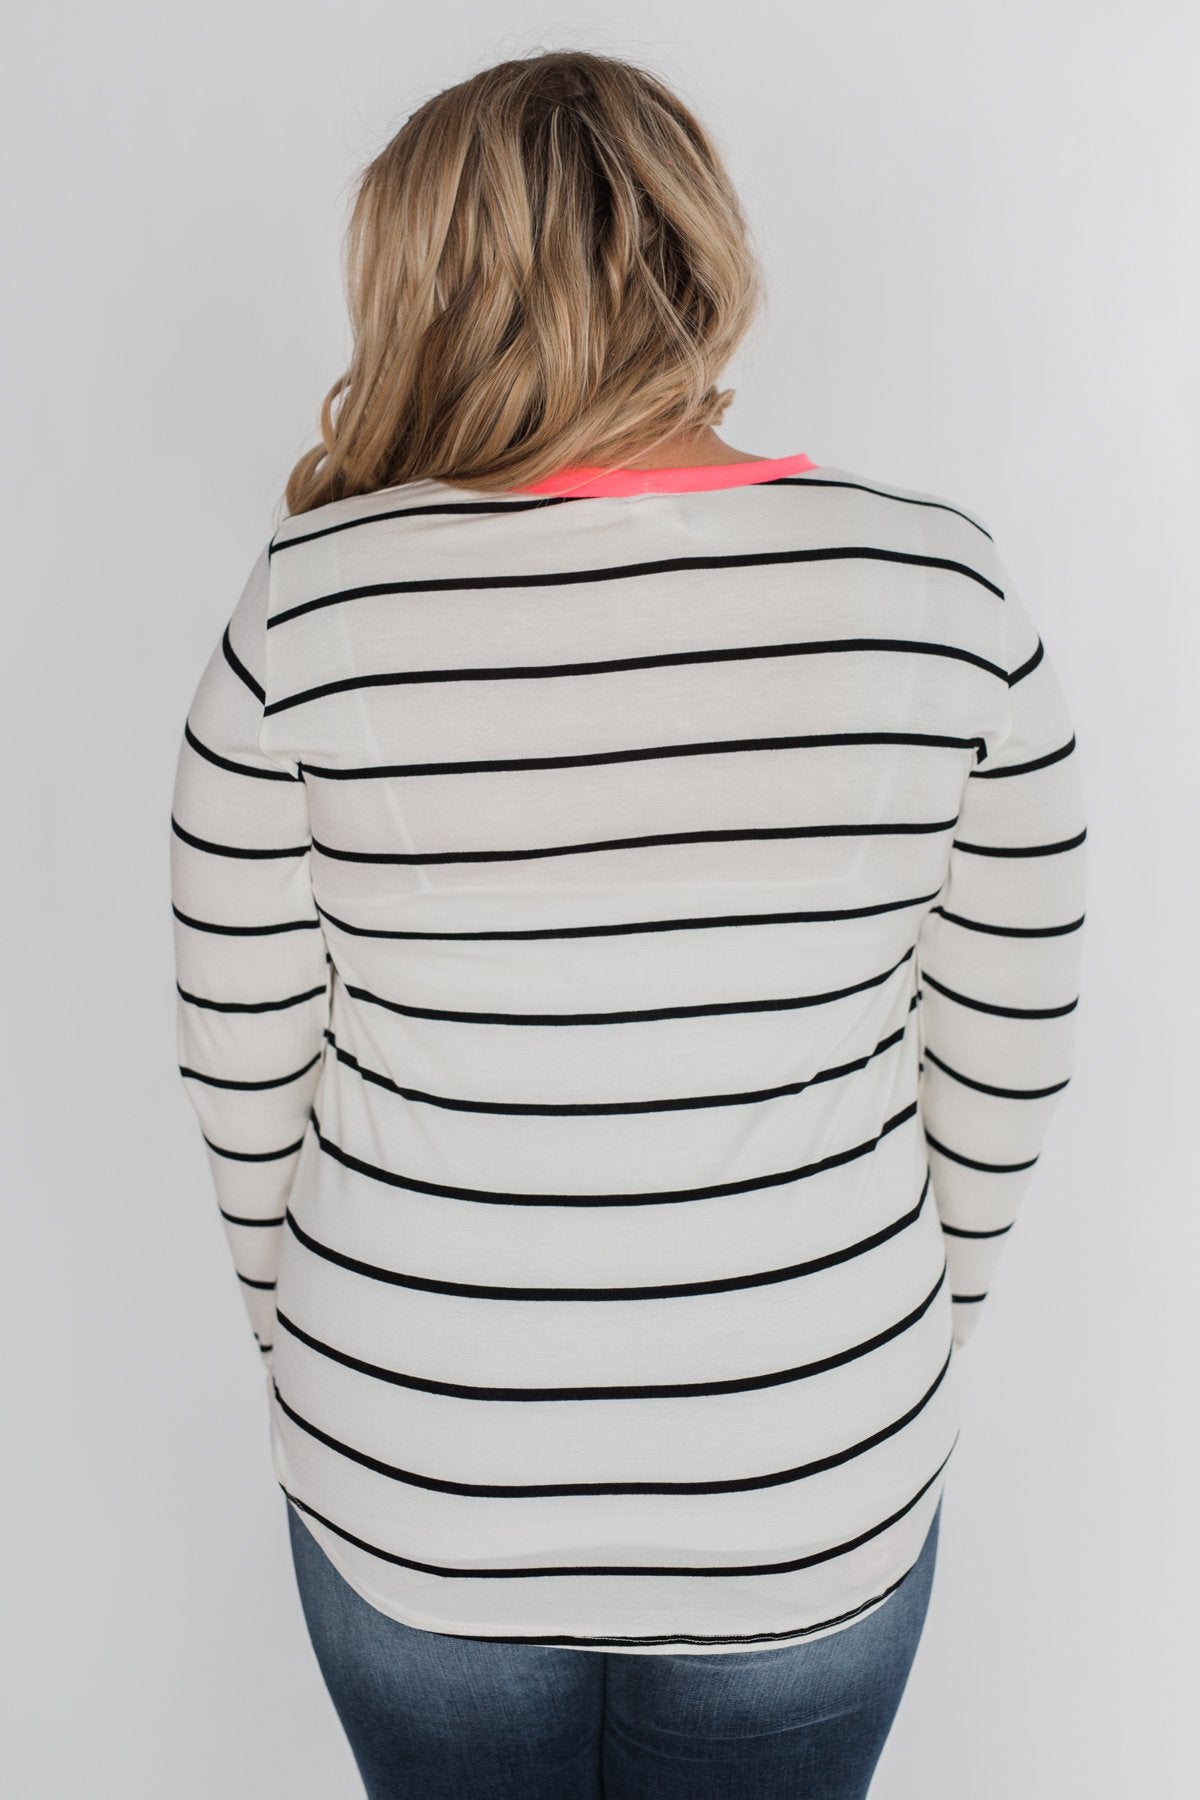 Love in My Heart Striped Top - Ivory & Bright Pink